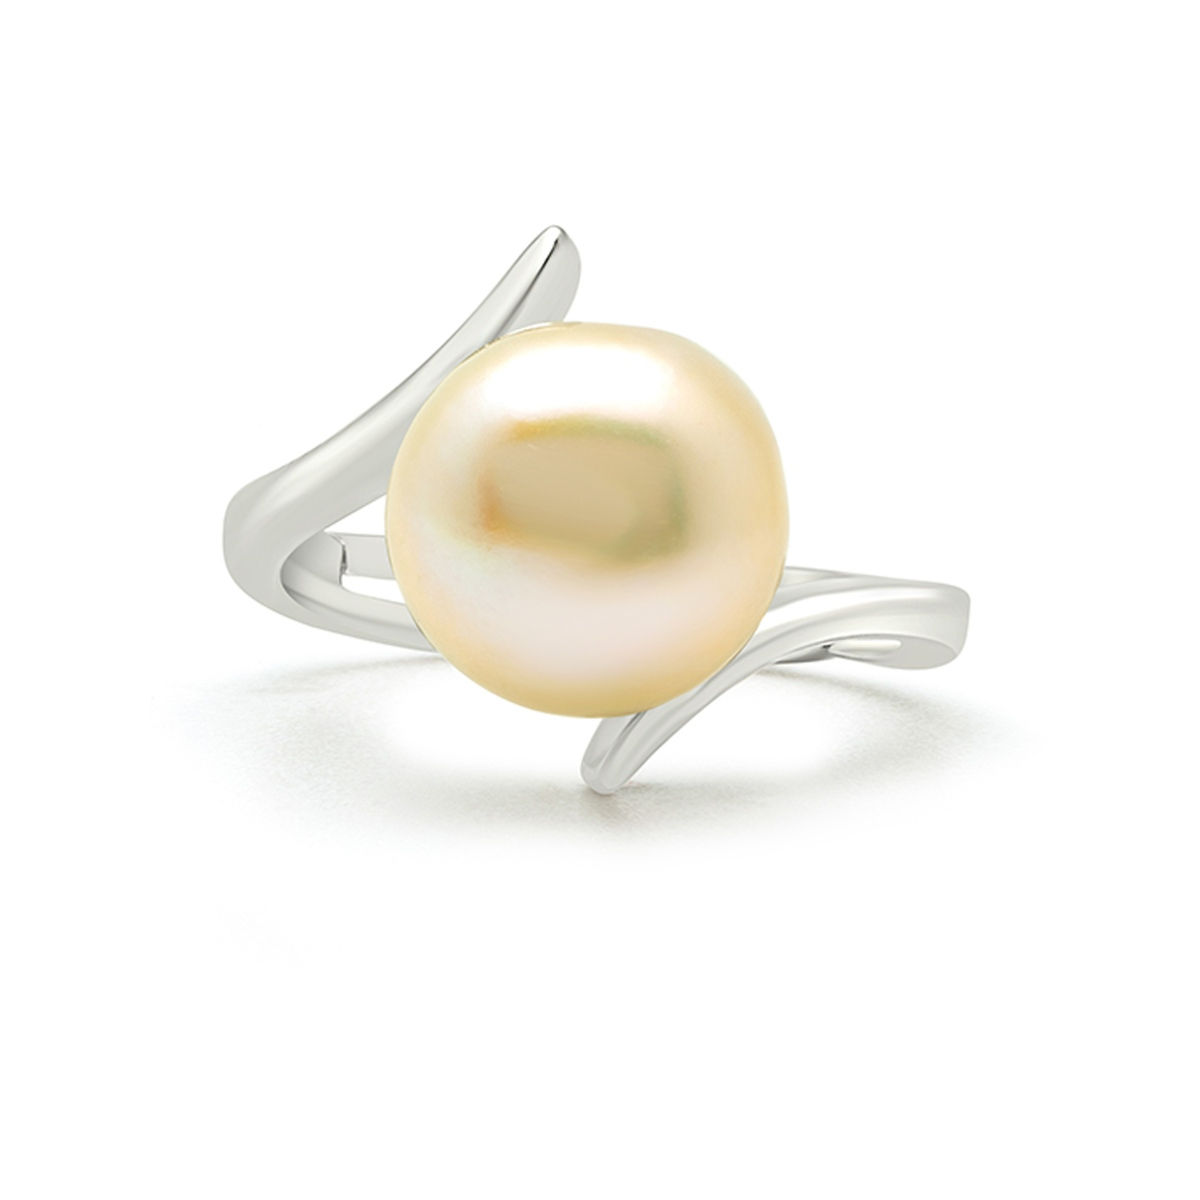 Buy Pearl Ring, White Pearl Ring, Natural Pearl, June Birthstone, White  Pearl, Real Pearl, Vintage Rings, White Ring, Solid Silver Ring, Pearl  Online in India - Etsy